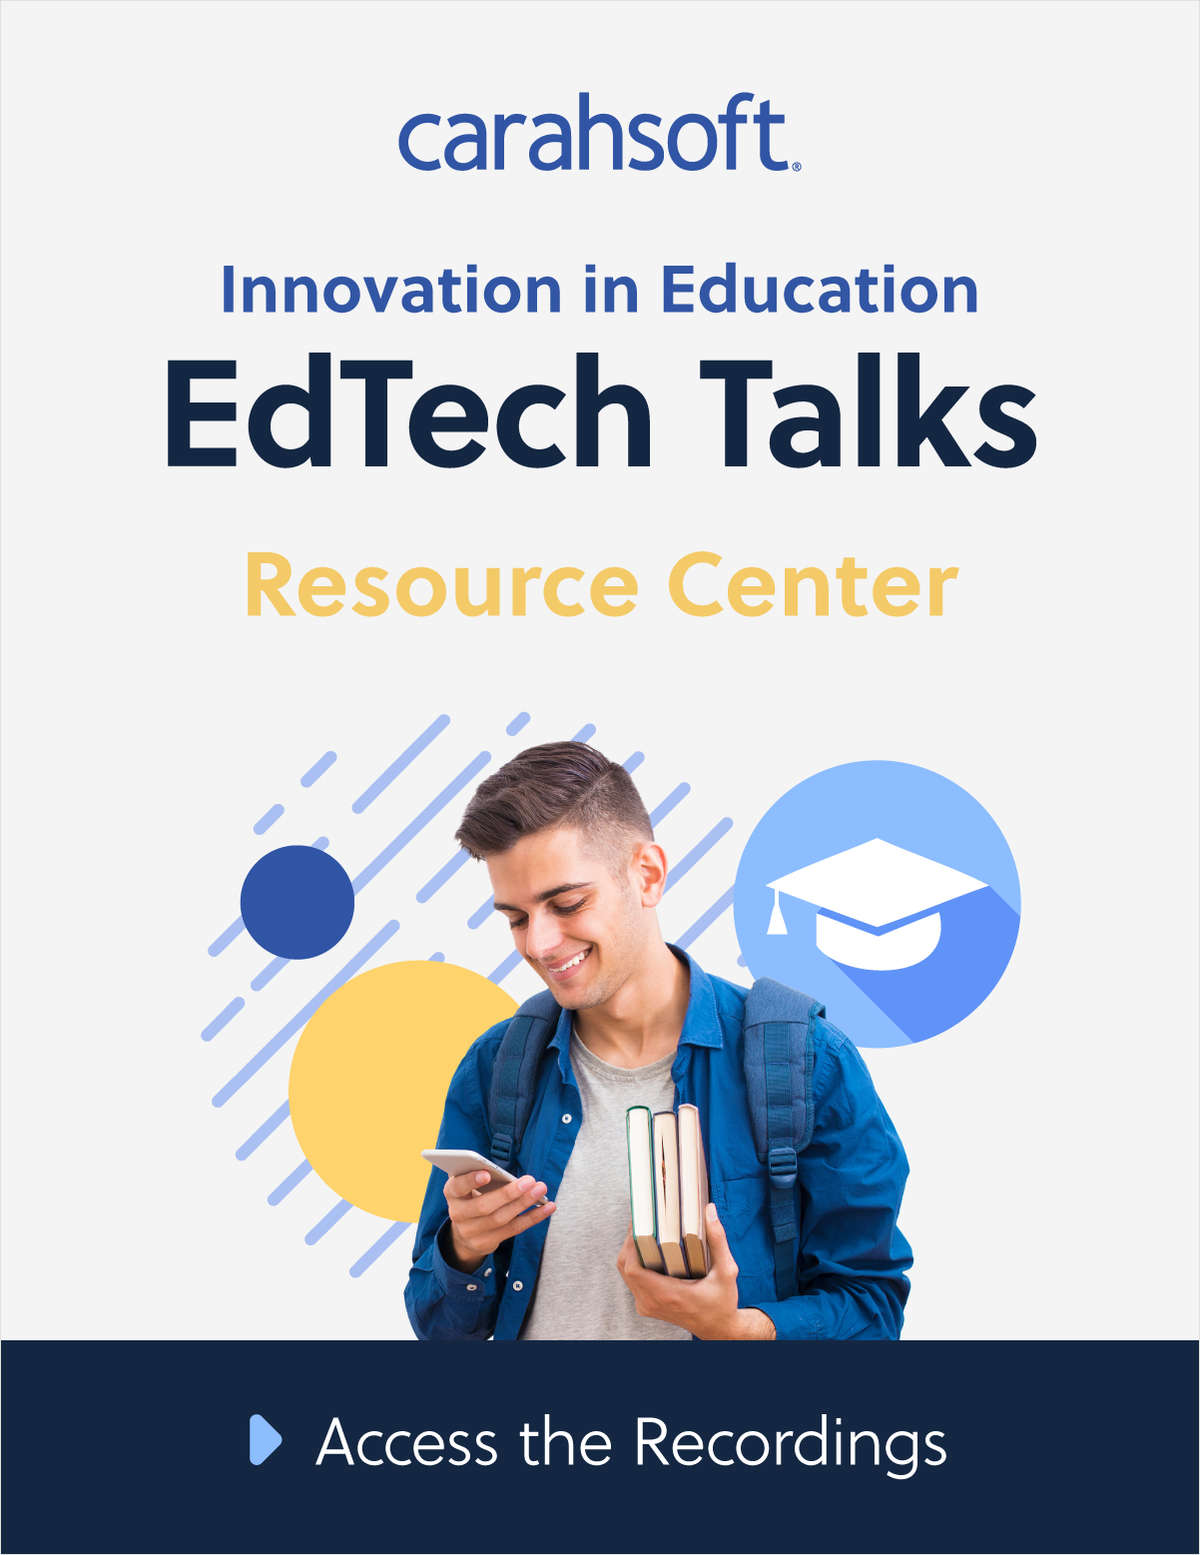 EdTech Experts Explore Innovative Trends in Education Technology